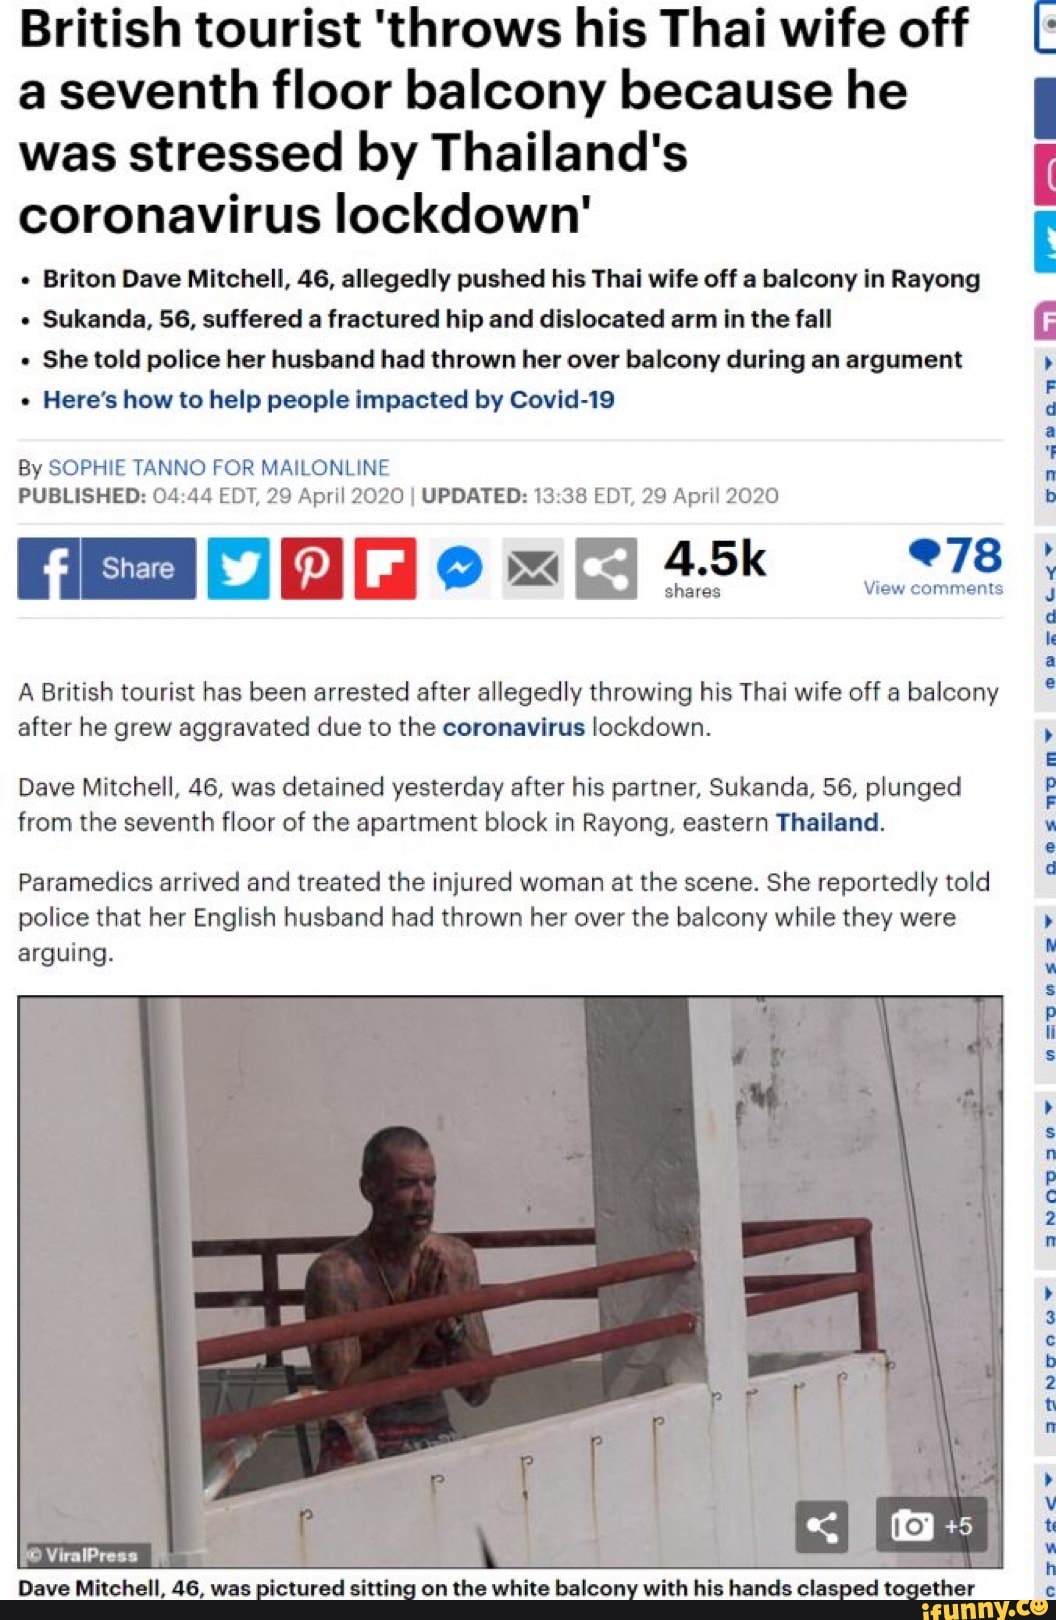 British Tourist Throws His Thai Wife Off A Seventh Floor Balcony Because He Was Stressed By 